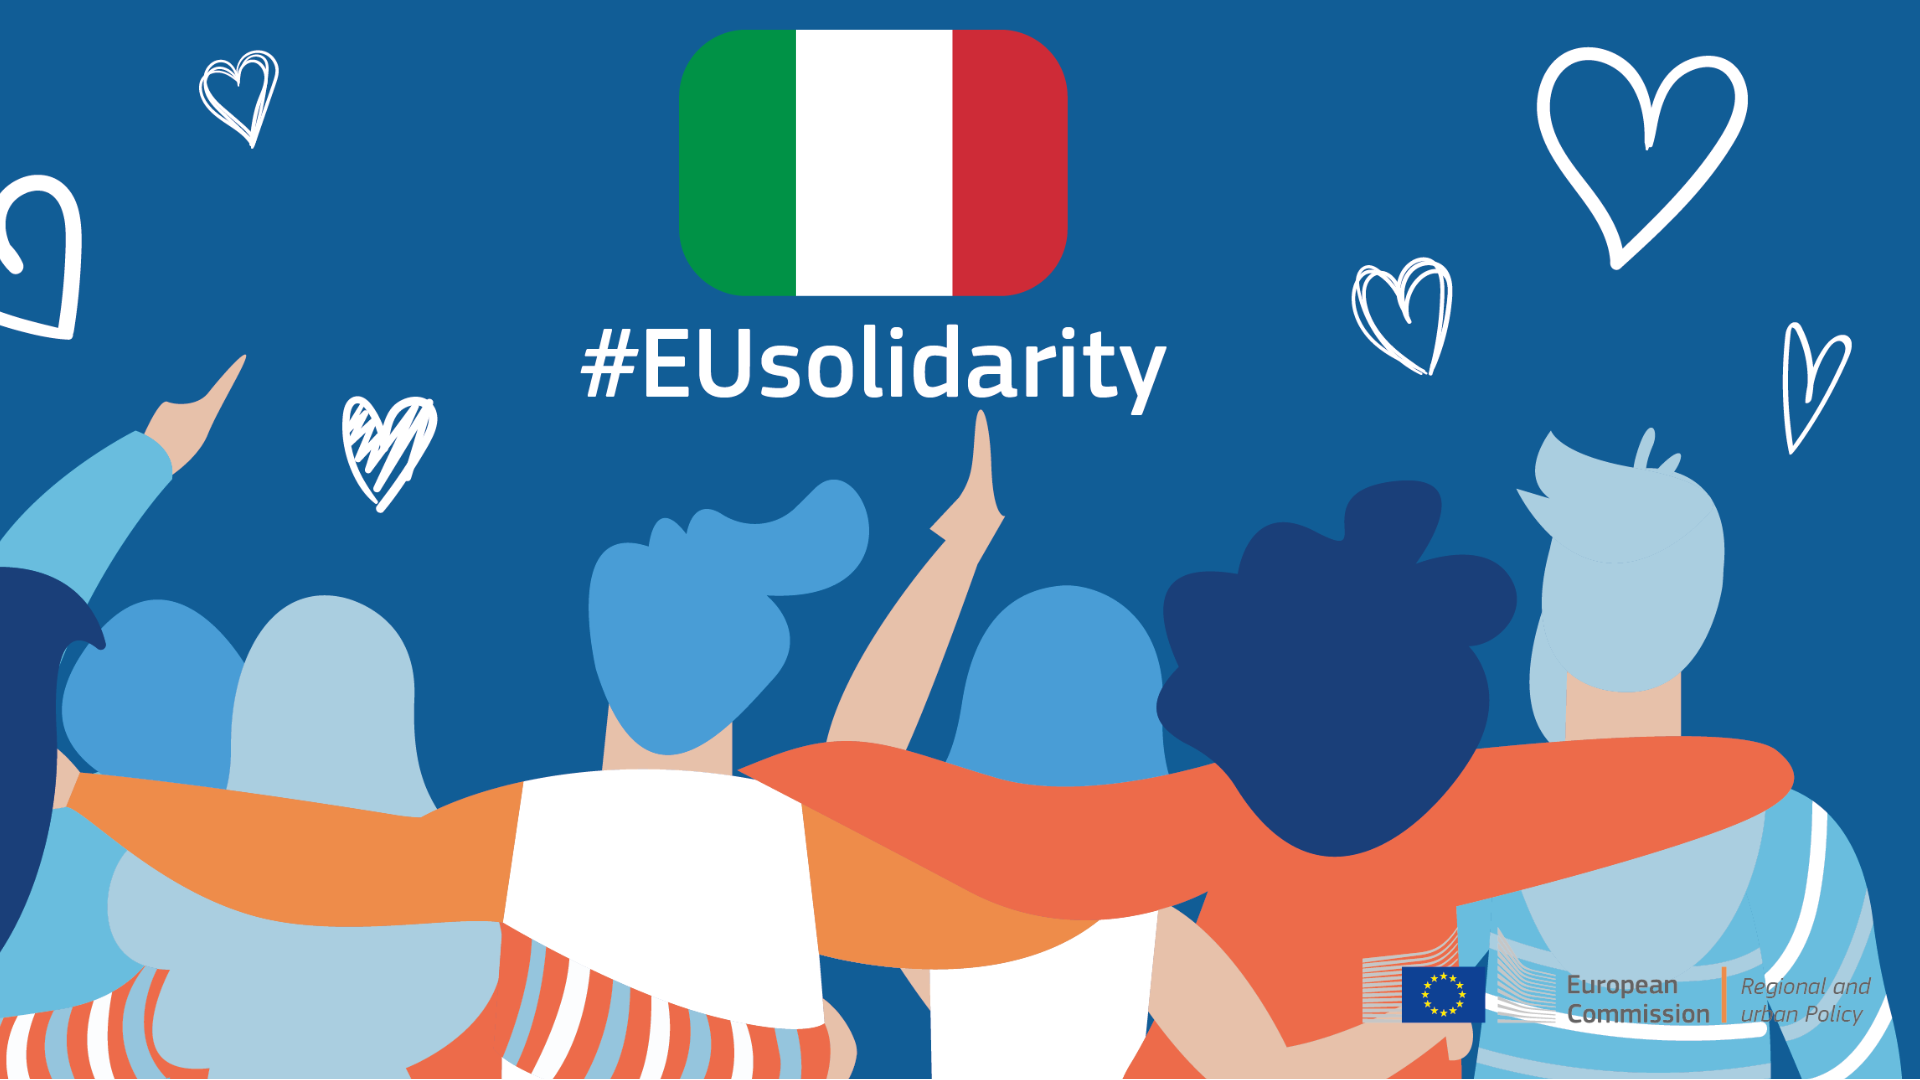 Almost €21 million in European Solidarity Funds awarded to the Marche region in Italy to repair damages caused by the severe flooding in 2022